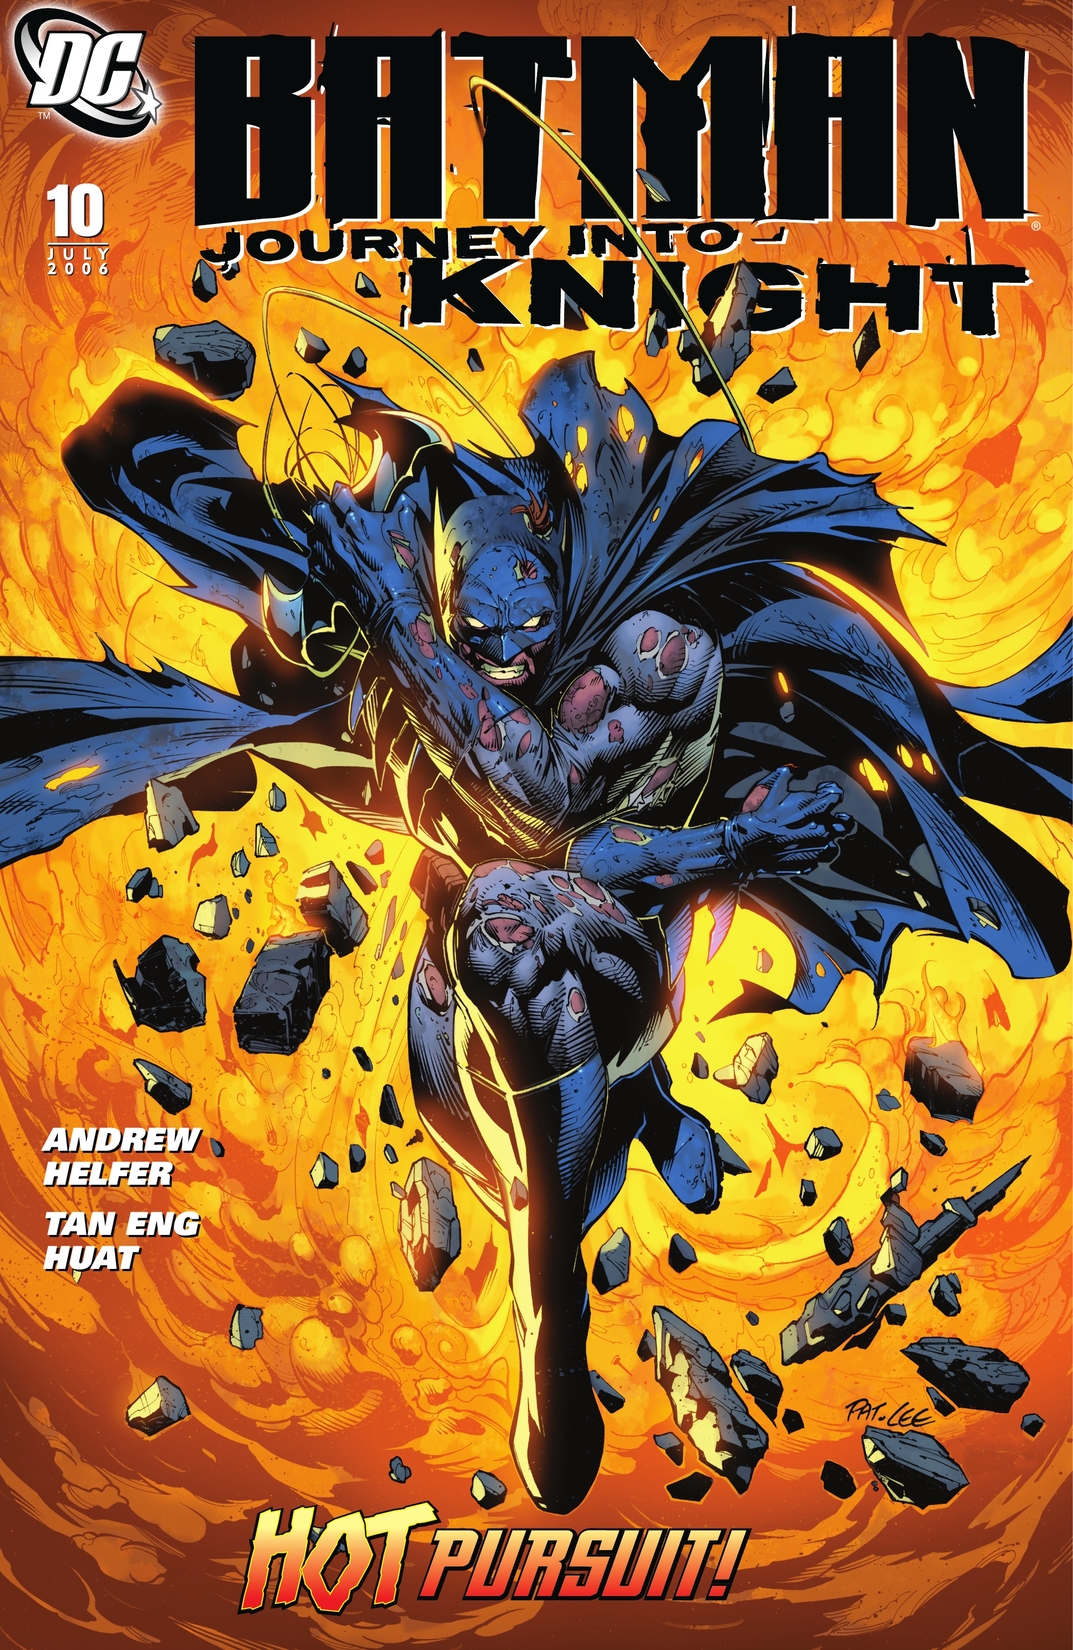 Batman: Journey into Knight #10 preview images